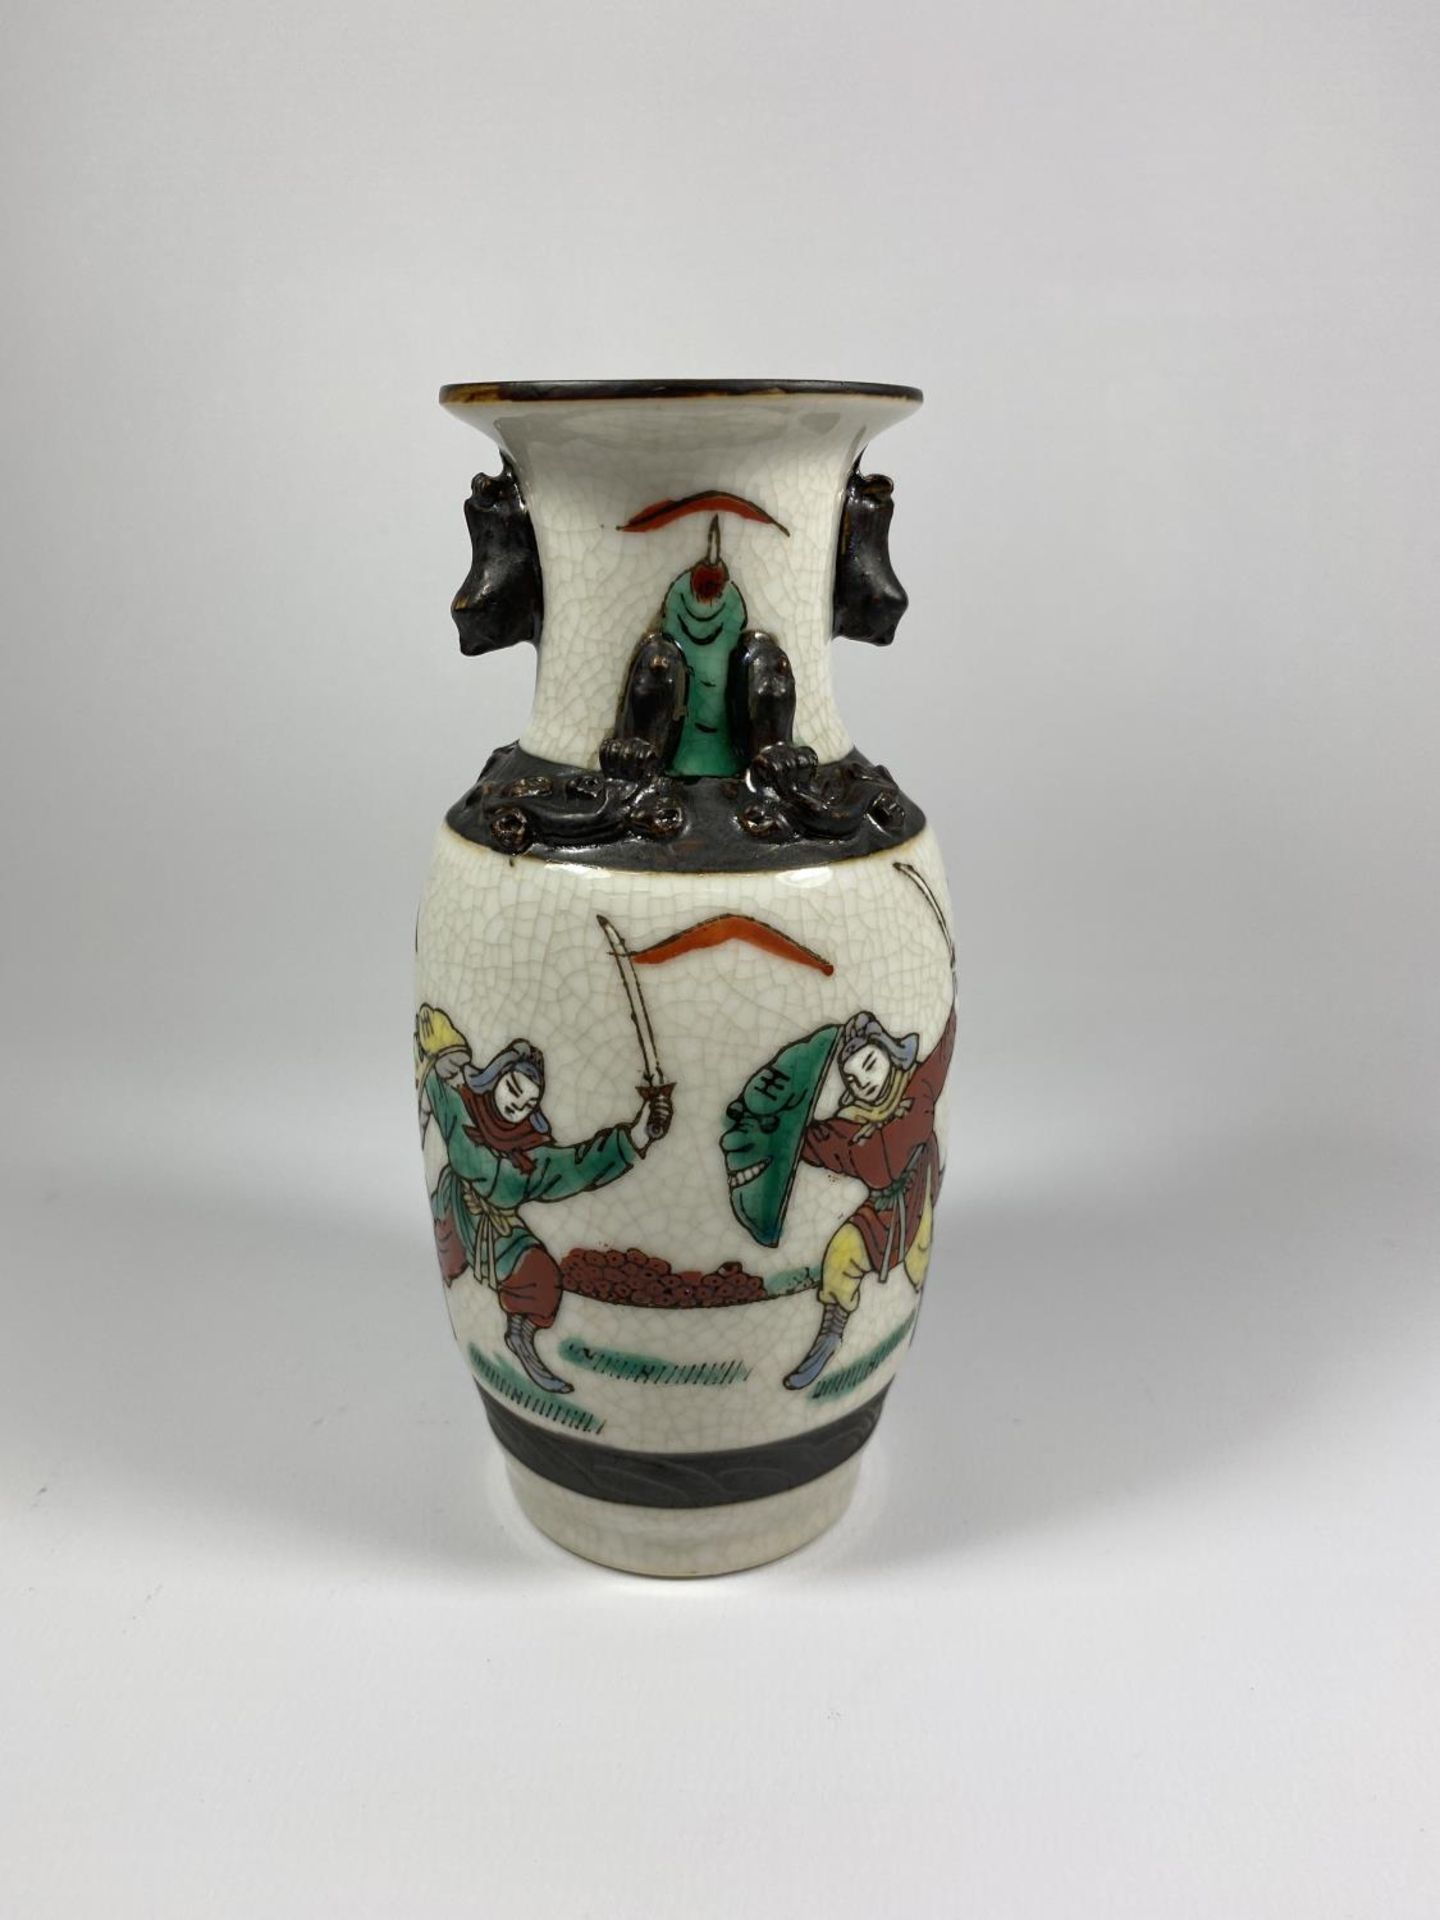 A CHINESE CRACKLE GLAZE VASE WITH WARRIOR DESIGN, SEAL MARK TO BASE, HEIGHT 15CM